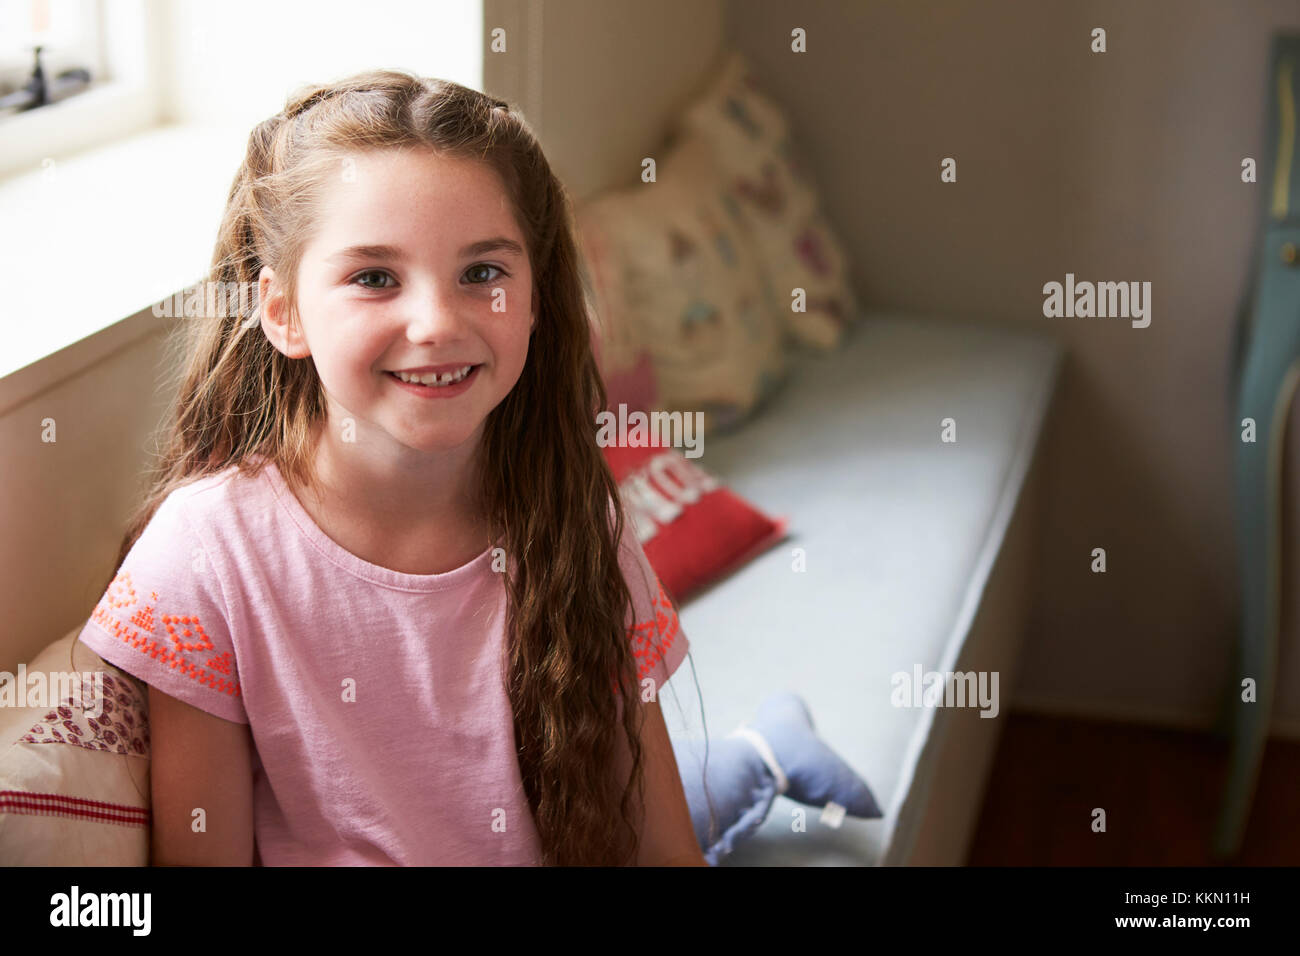 Portrait Of Smiling Young Girl Sitting On Window Seat At Home Stock Photo